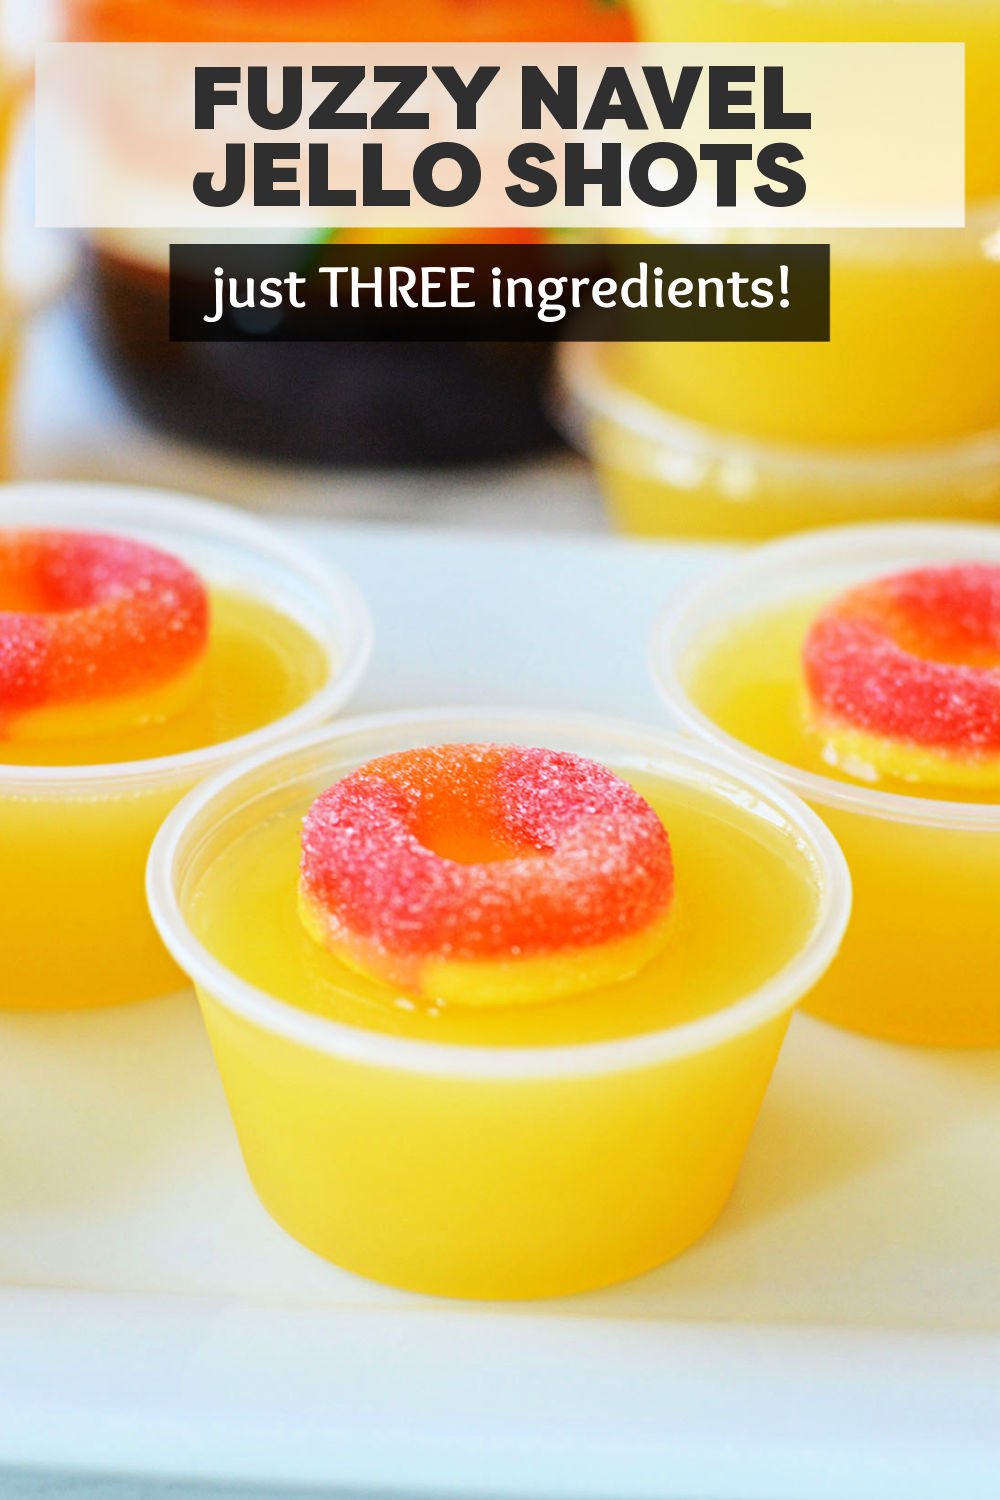 You only need three ingredients and about 10 minutes to make a batch of these easy Fuzzy Navel Jello Shots. Fun for a party! | www.persnicketyplates.com